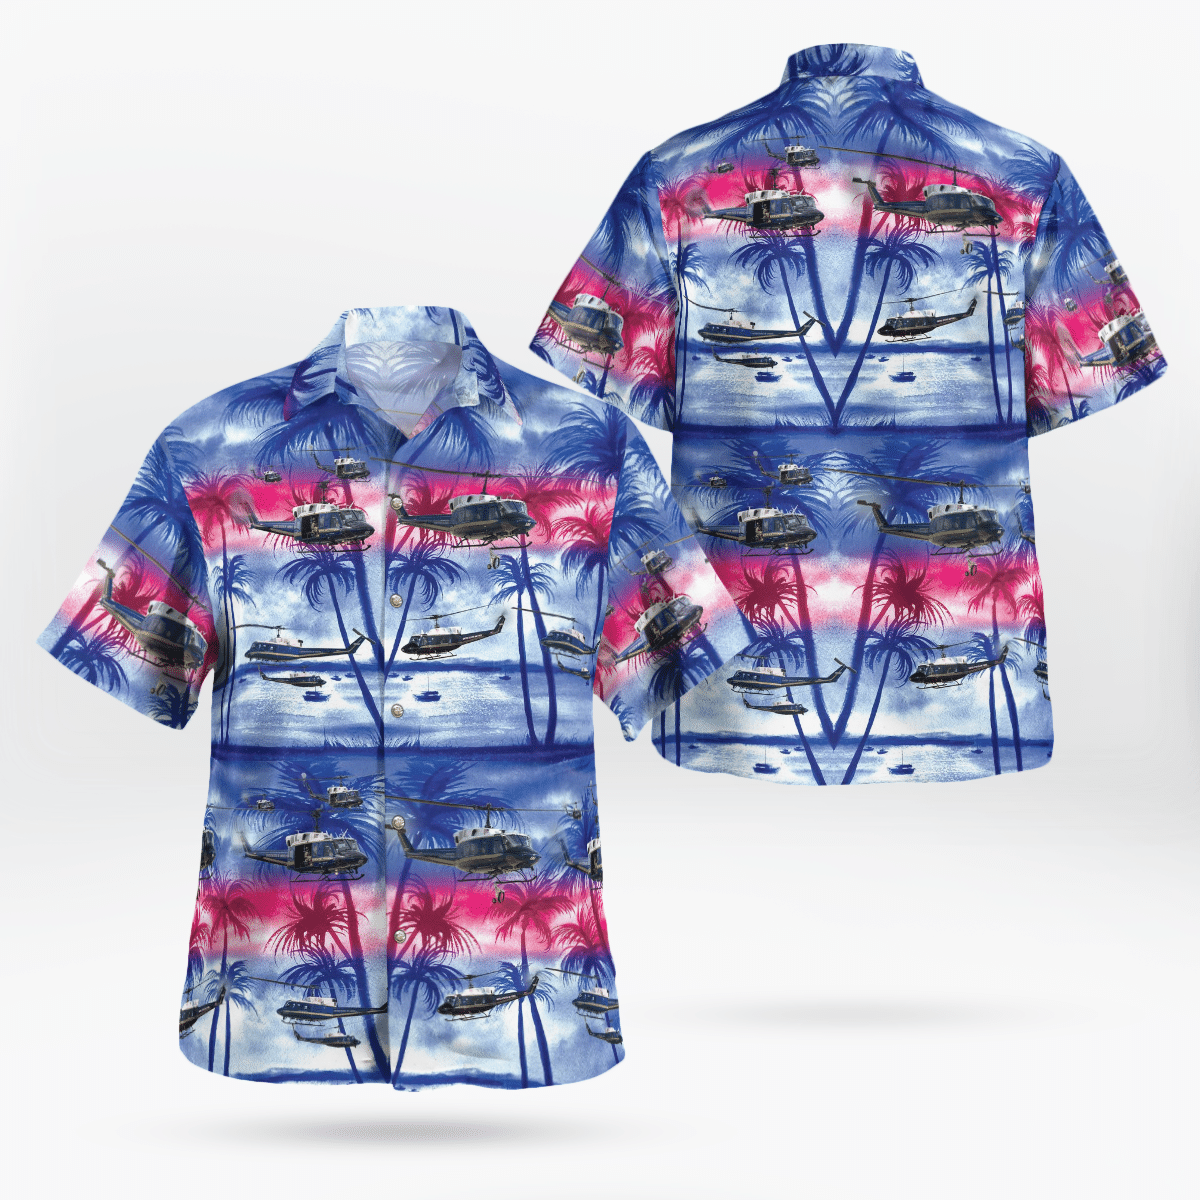 Consider getting these Hawaiian Shirt for your friends 319